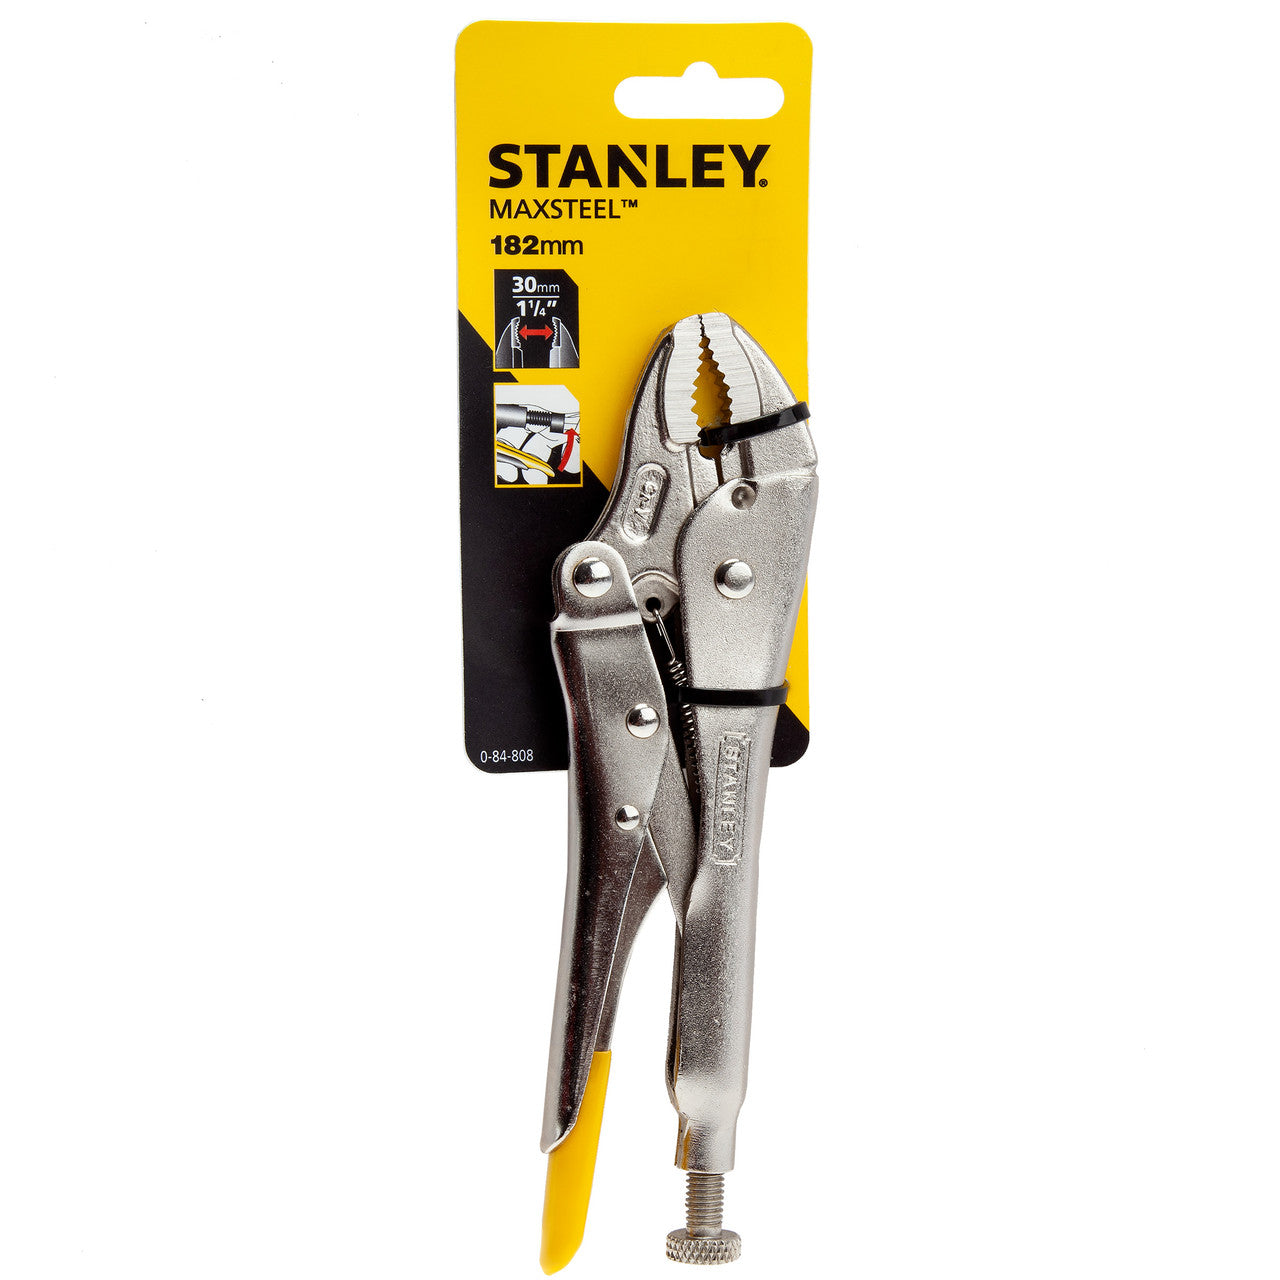 Stanley 0-84-808 MaxSteel Locking Pliers Curved Jaw 182mm